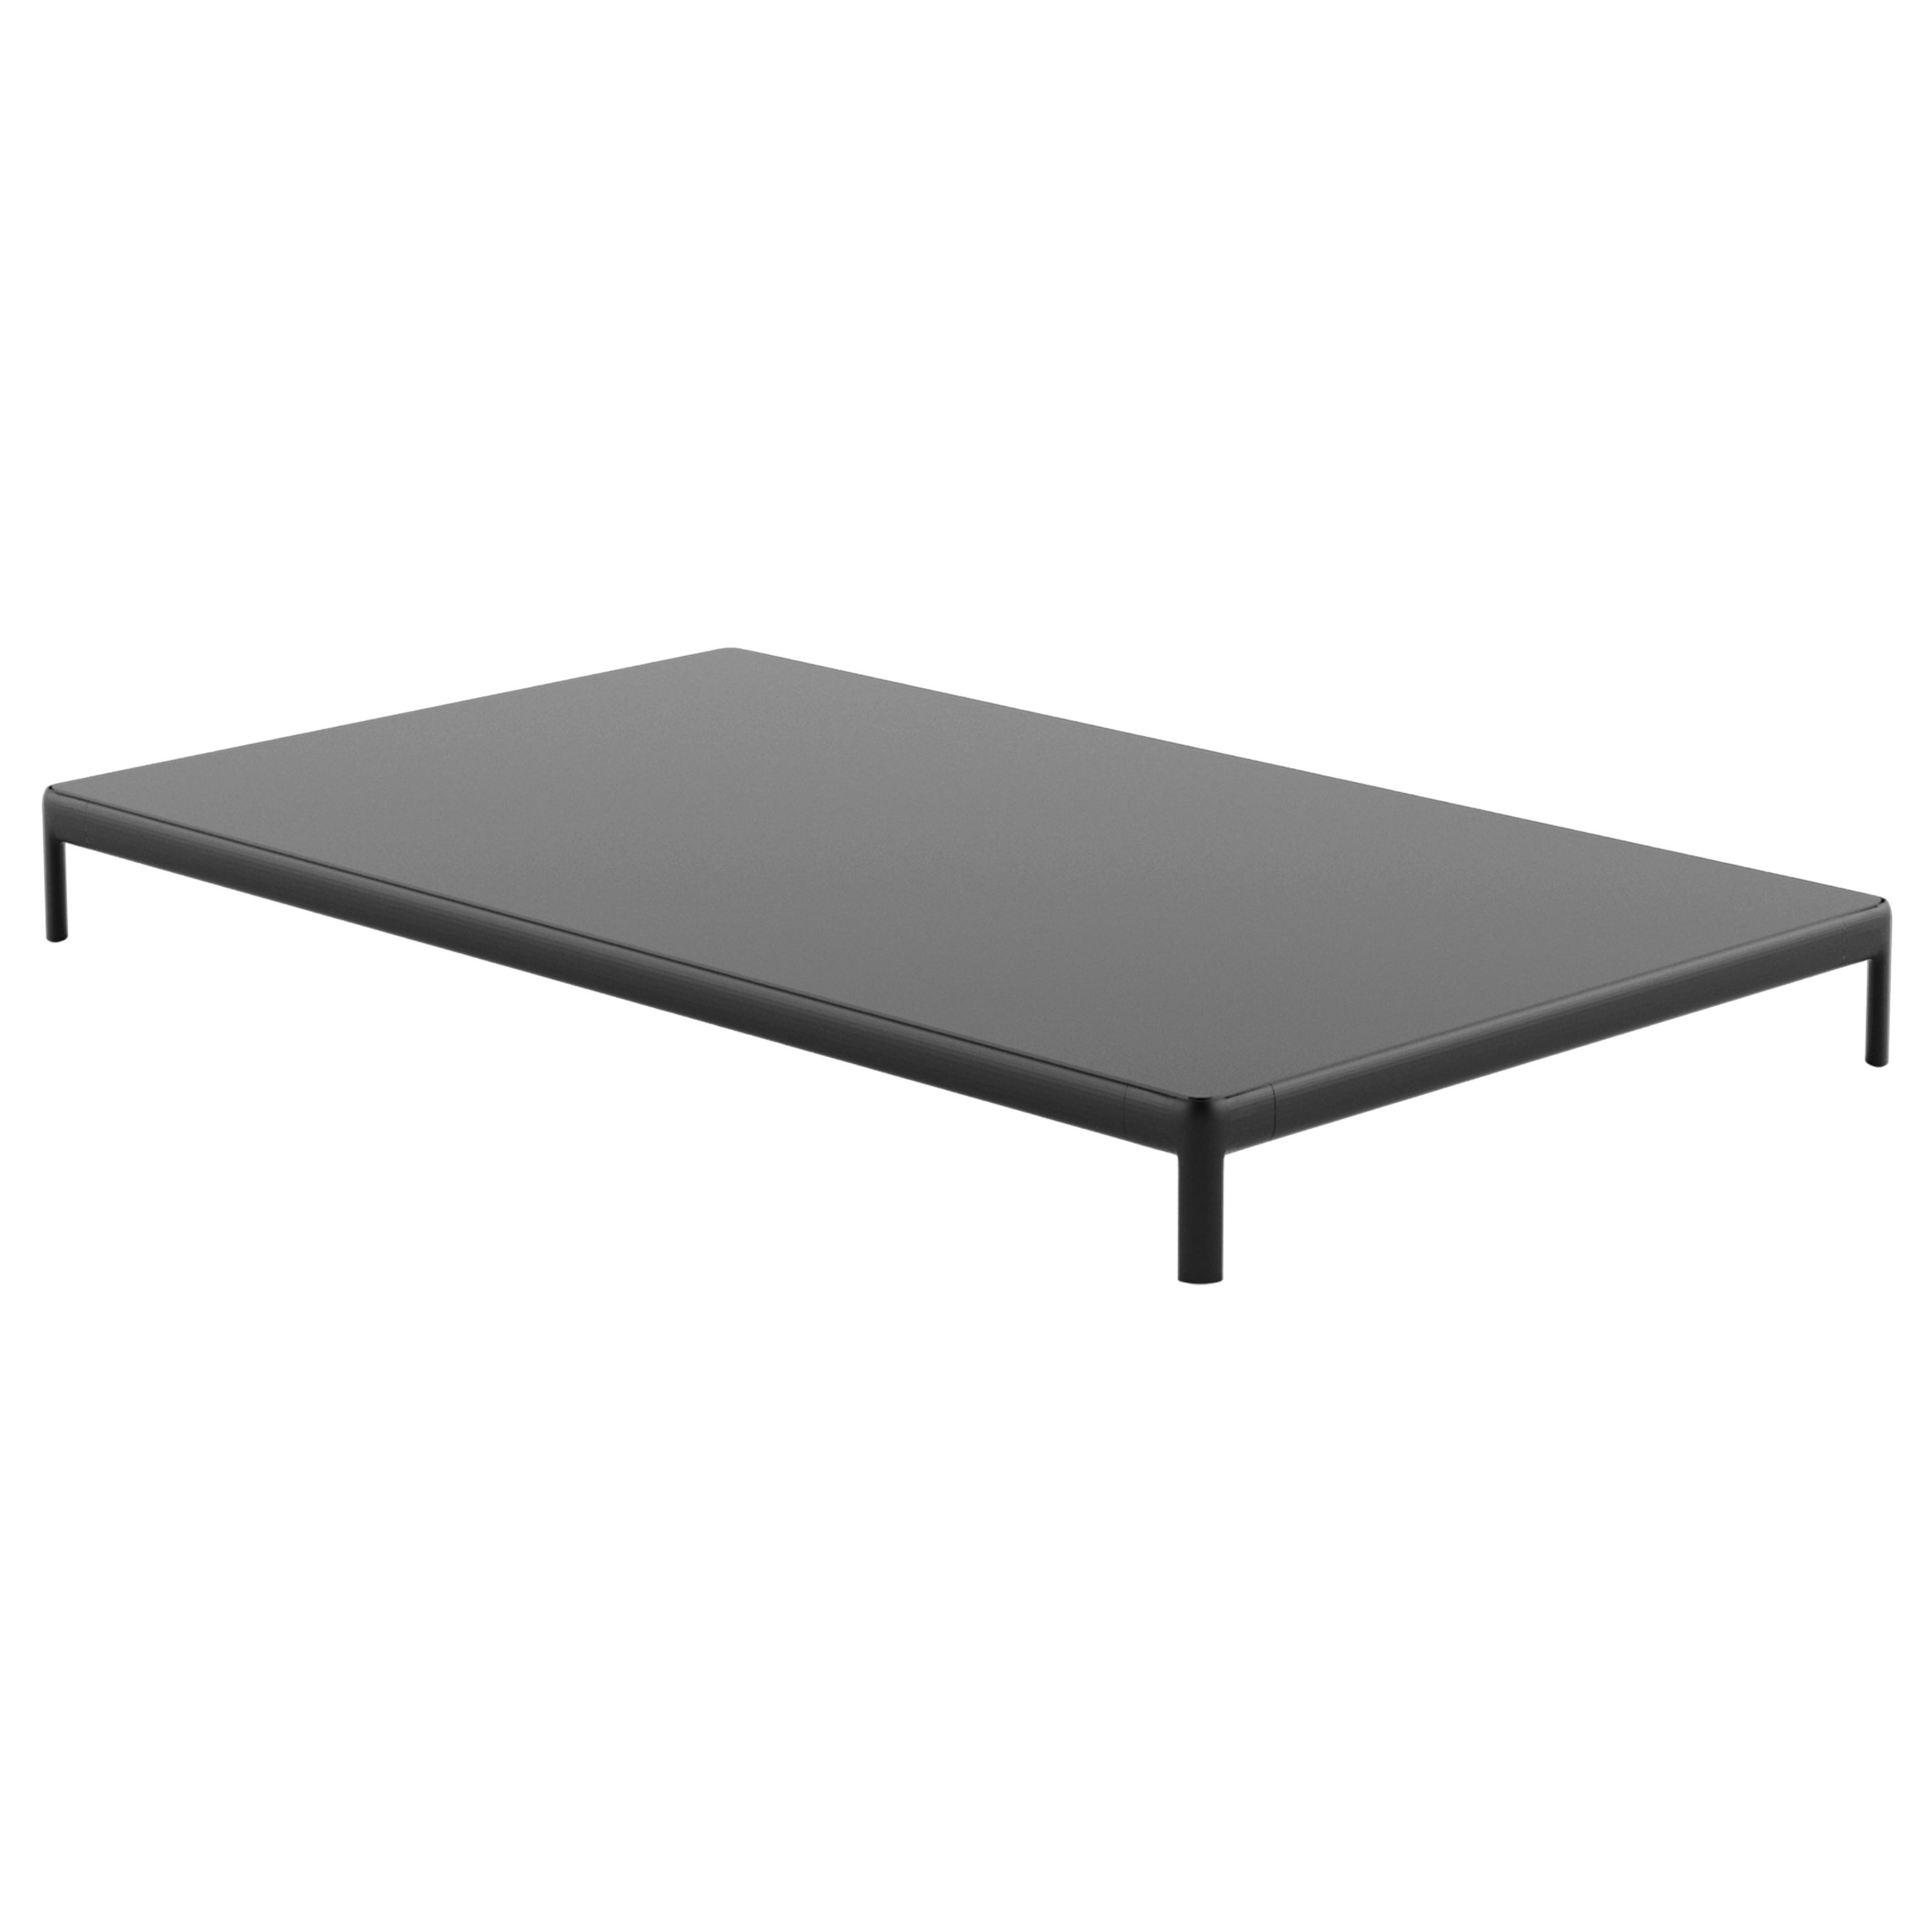 Alias P73 AluZen Soft Low Table Outdoor in Grey with Lacquered Aluminium Frame